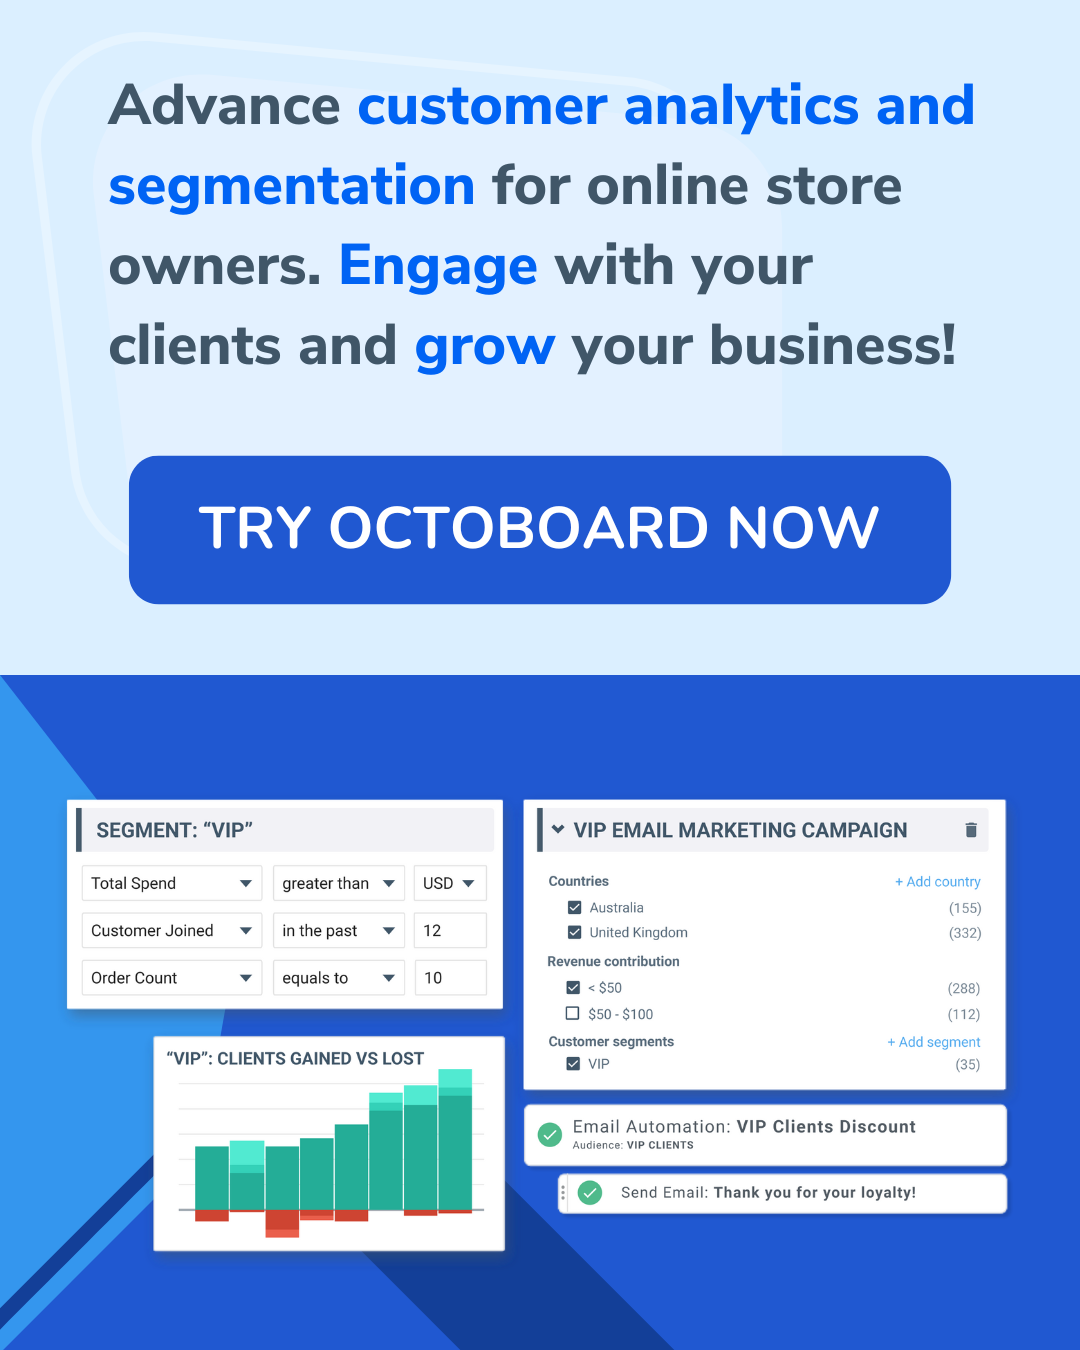 Advanced customer analytics and segmentation for online store owners. Engage with your clients and grow your business!